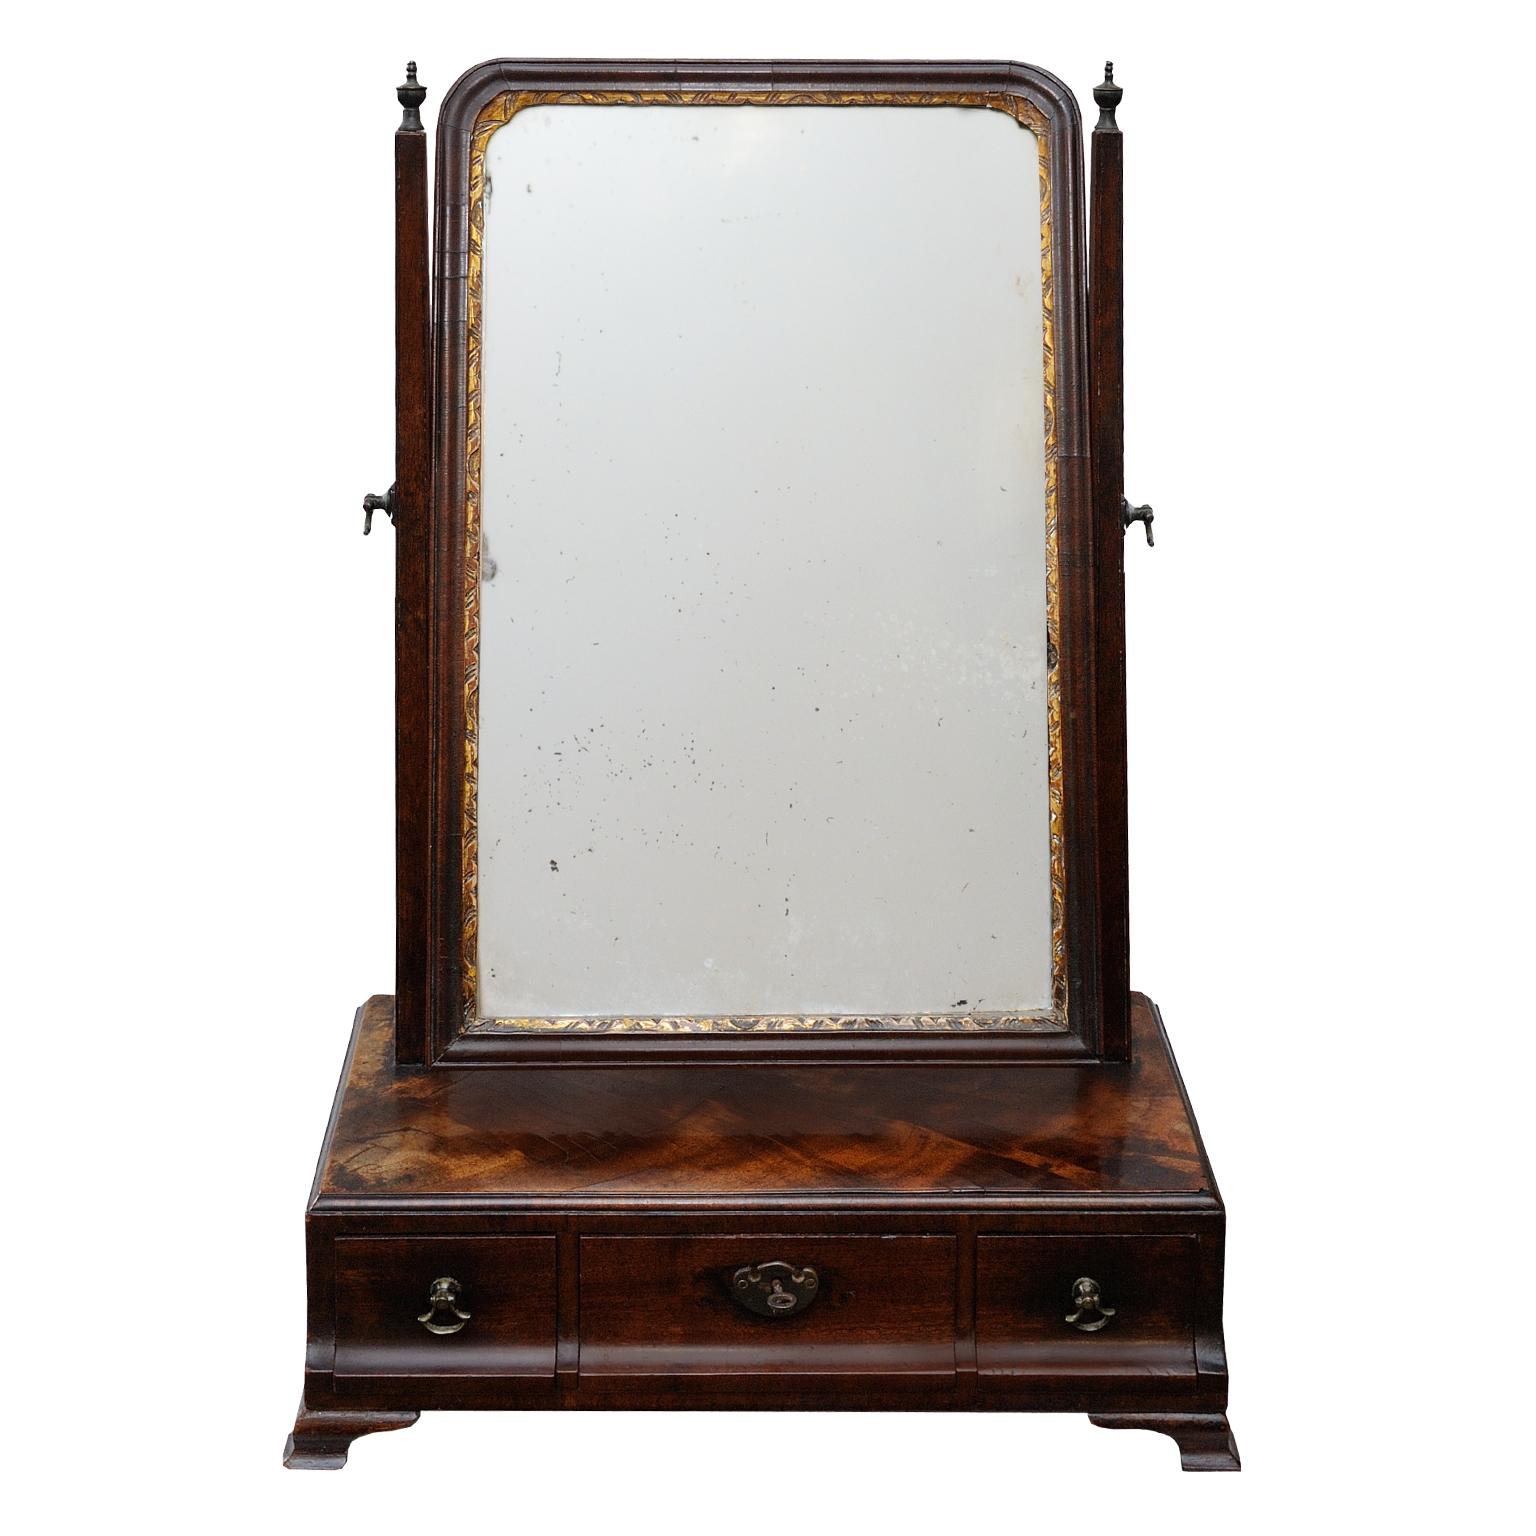 This is a good quality English George II transitional flame mahogany toilet mirror, with original mirror plate and overall original condition, circa 1730.